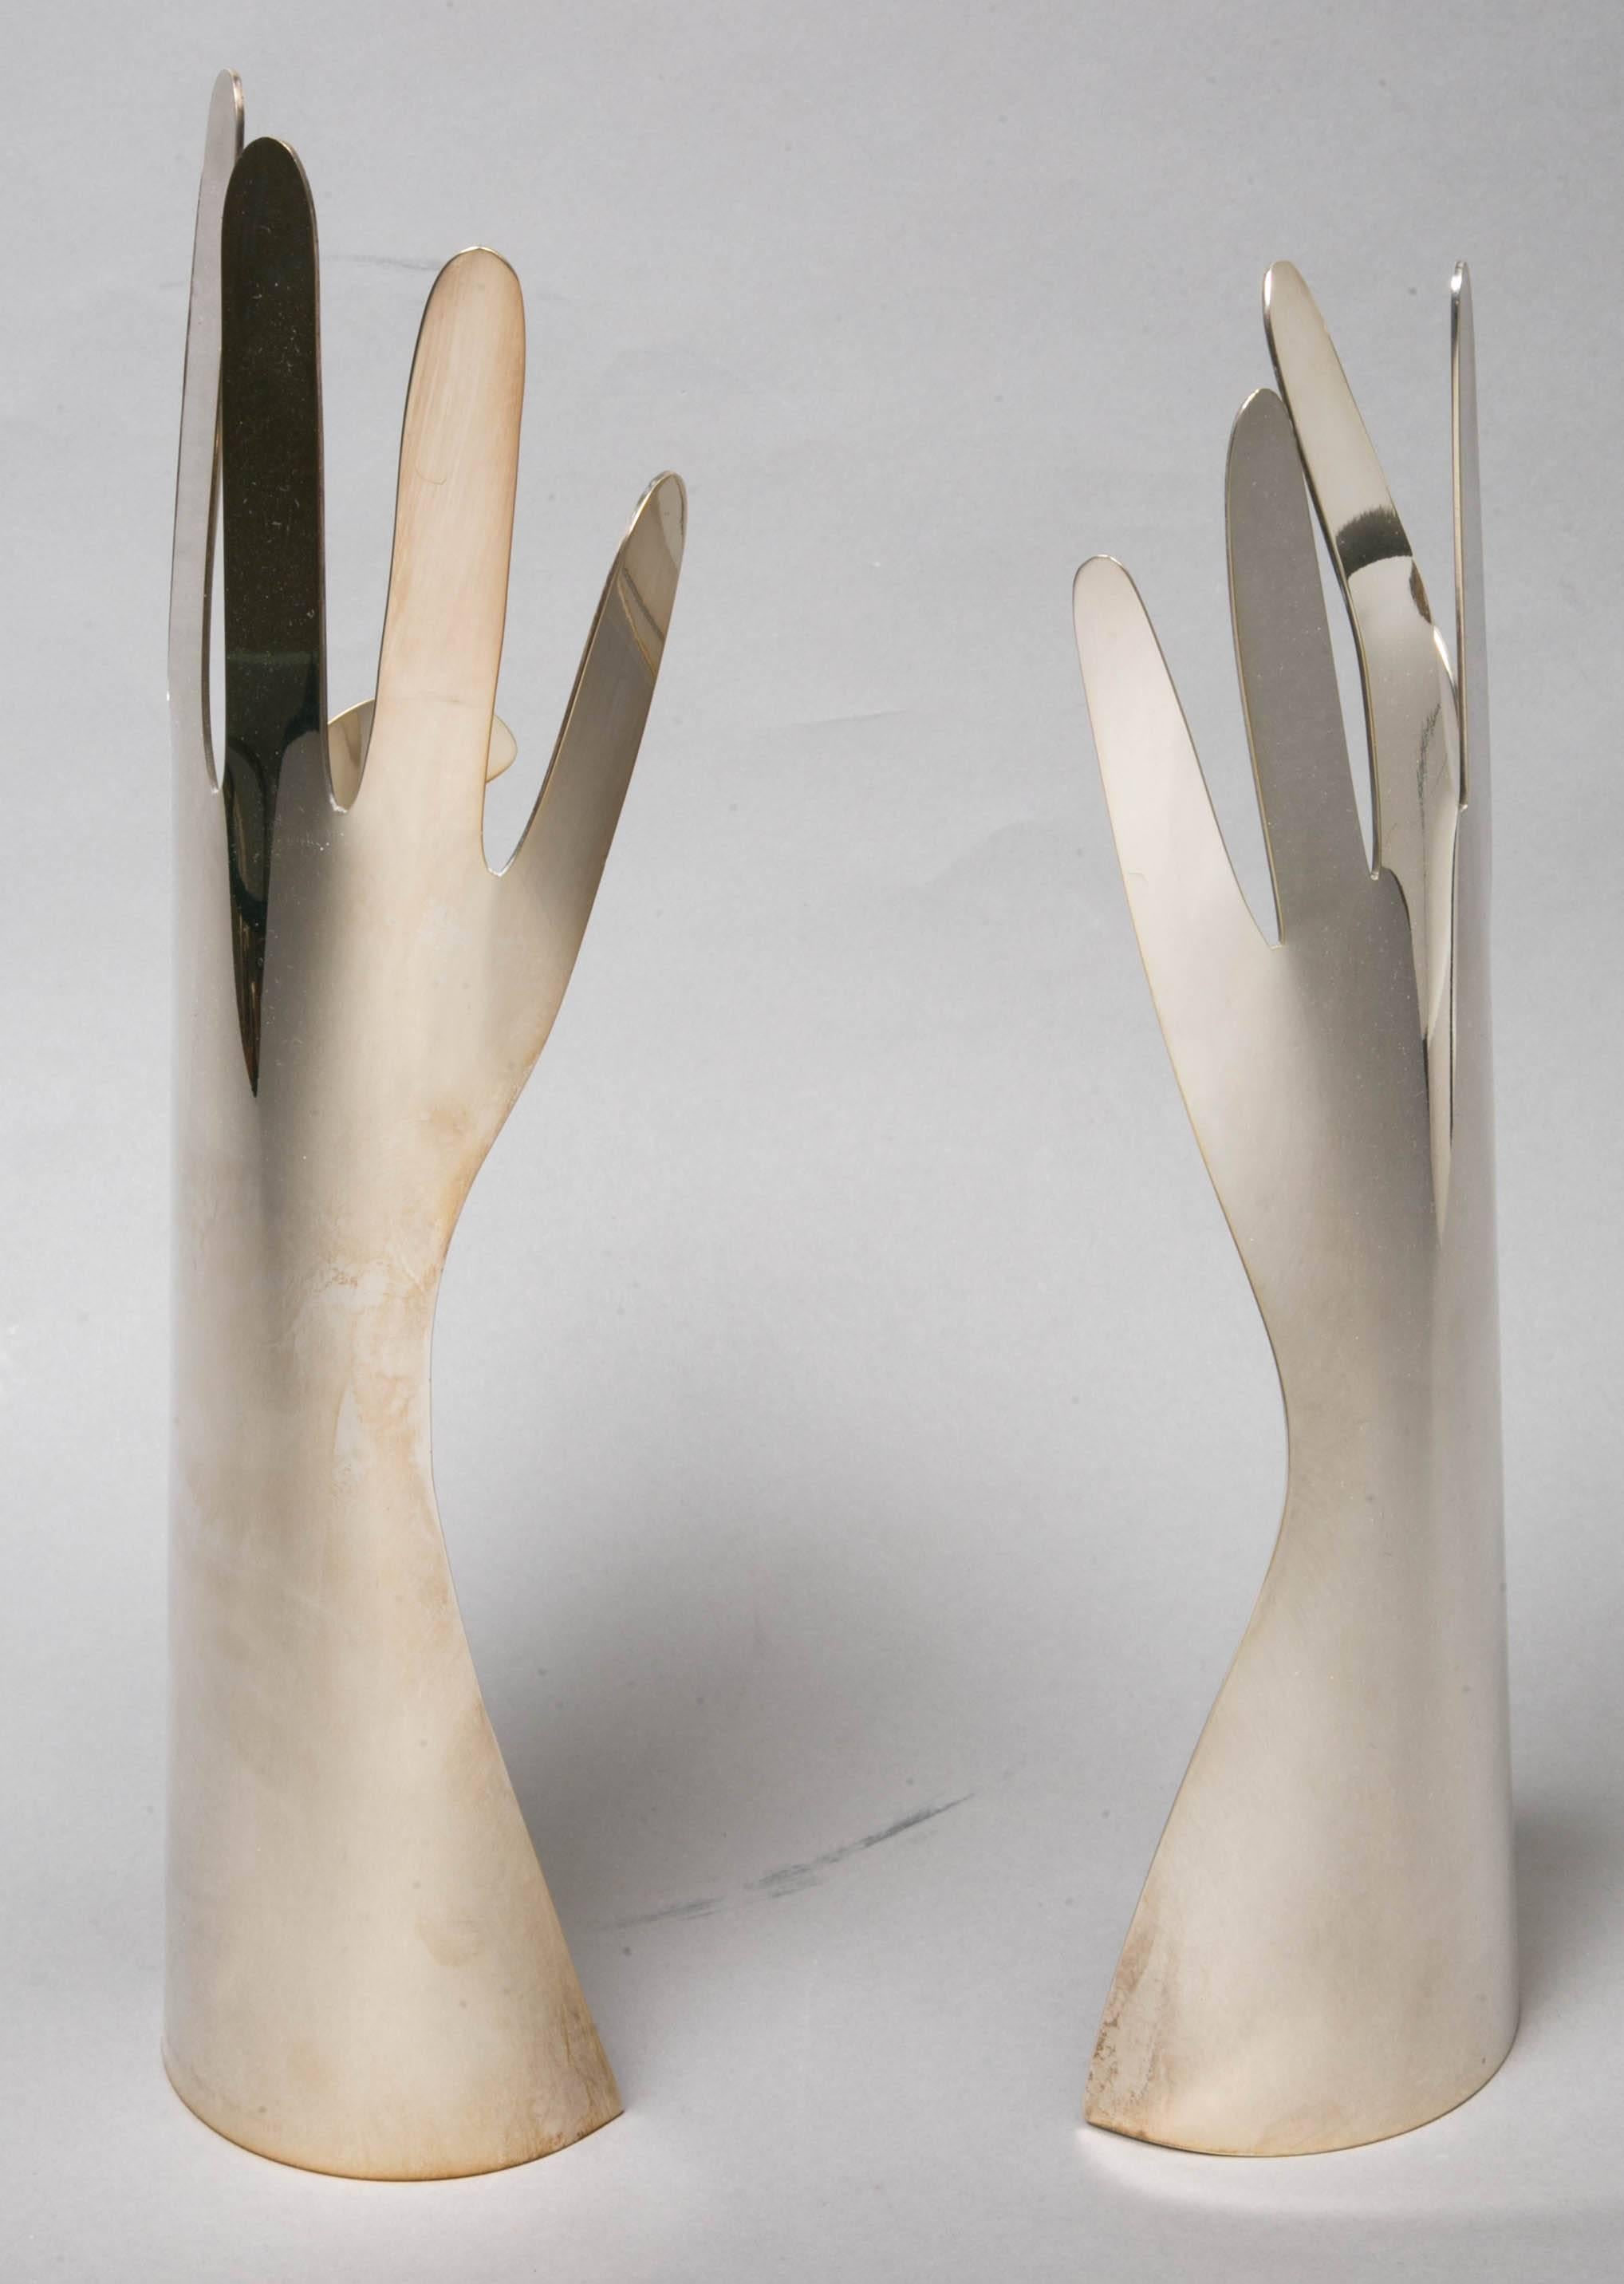 Two silvered metal hands by Gio Ponti (1891-1979) for L. Sabattini, 1978, Italy.
Left hand, and right hand with 6 fingers . 
Signed: Sabattini Italy-design Gio Ponti, 1978.
Dimensions : Height 32 and 35 cm. 

Refined objects as results of the